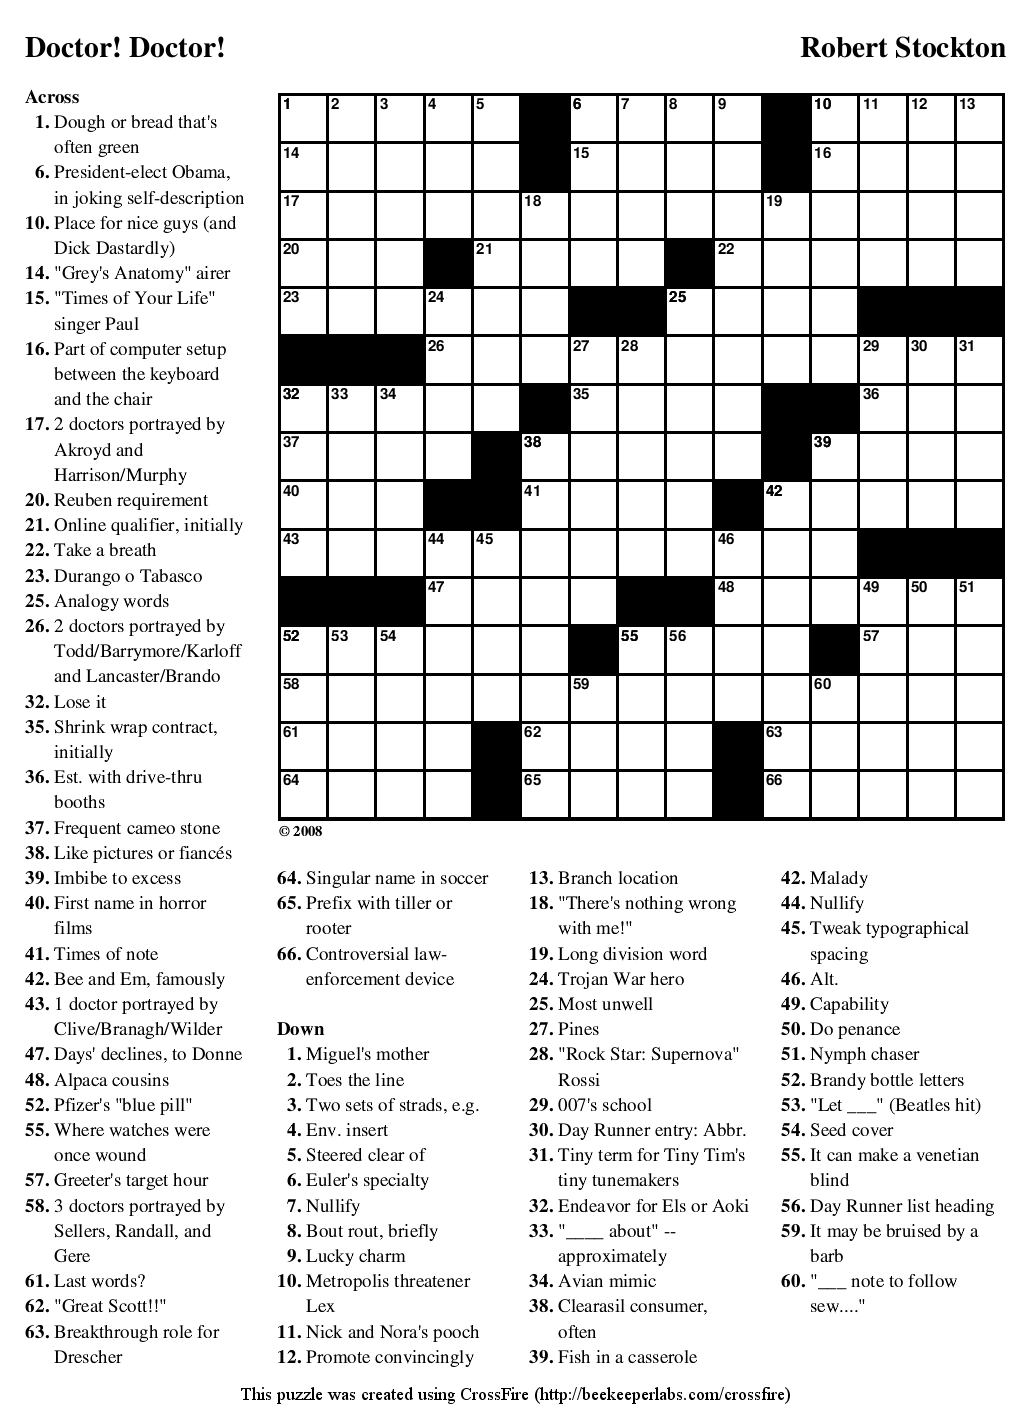 Crossword Puzzles Printable - Yahoo Image Search Results | Crossword - Crossword Puzzle Maker Free And Printable